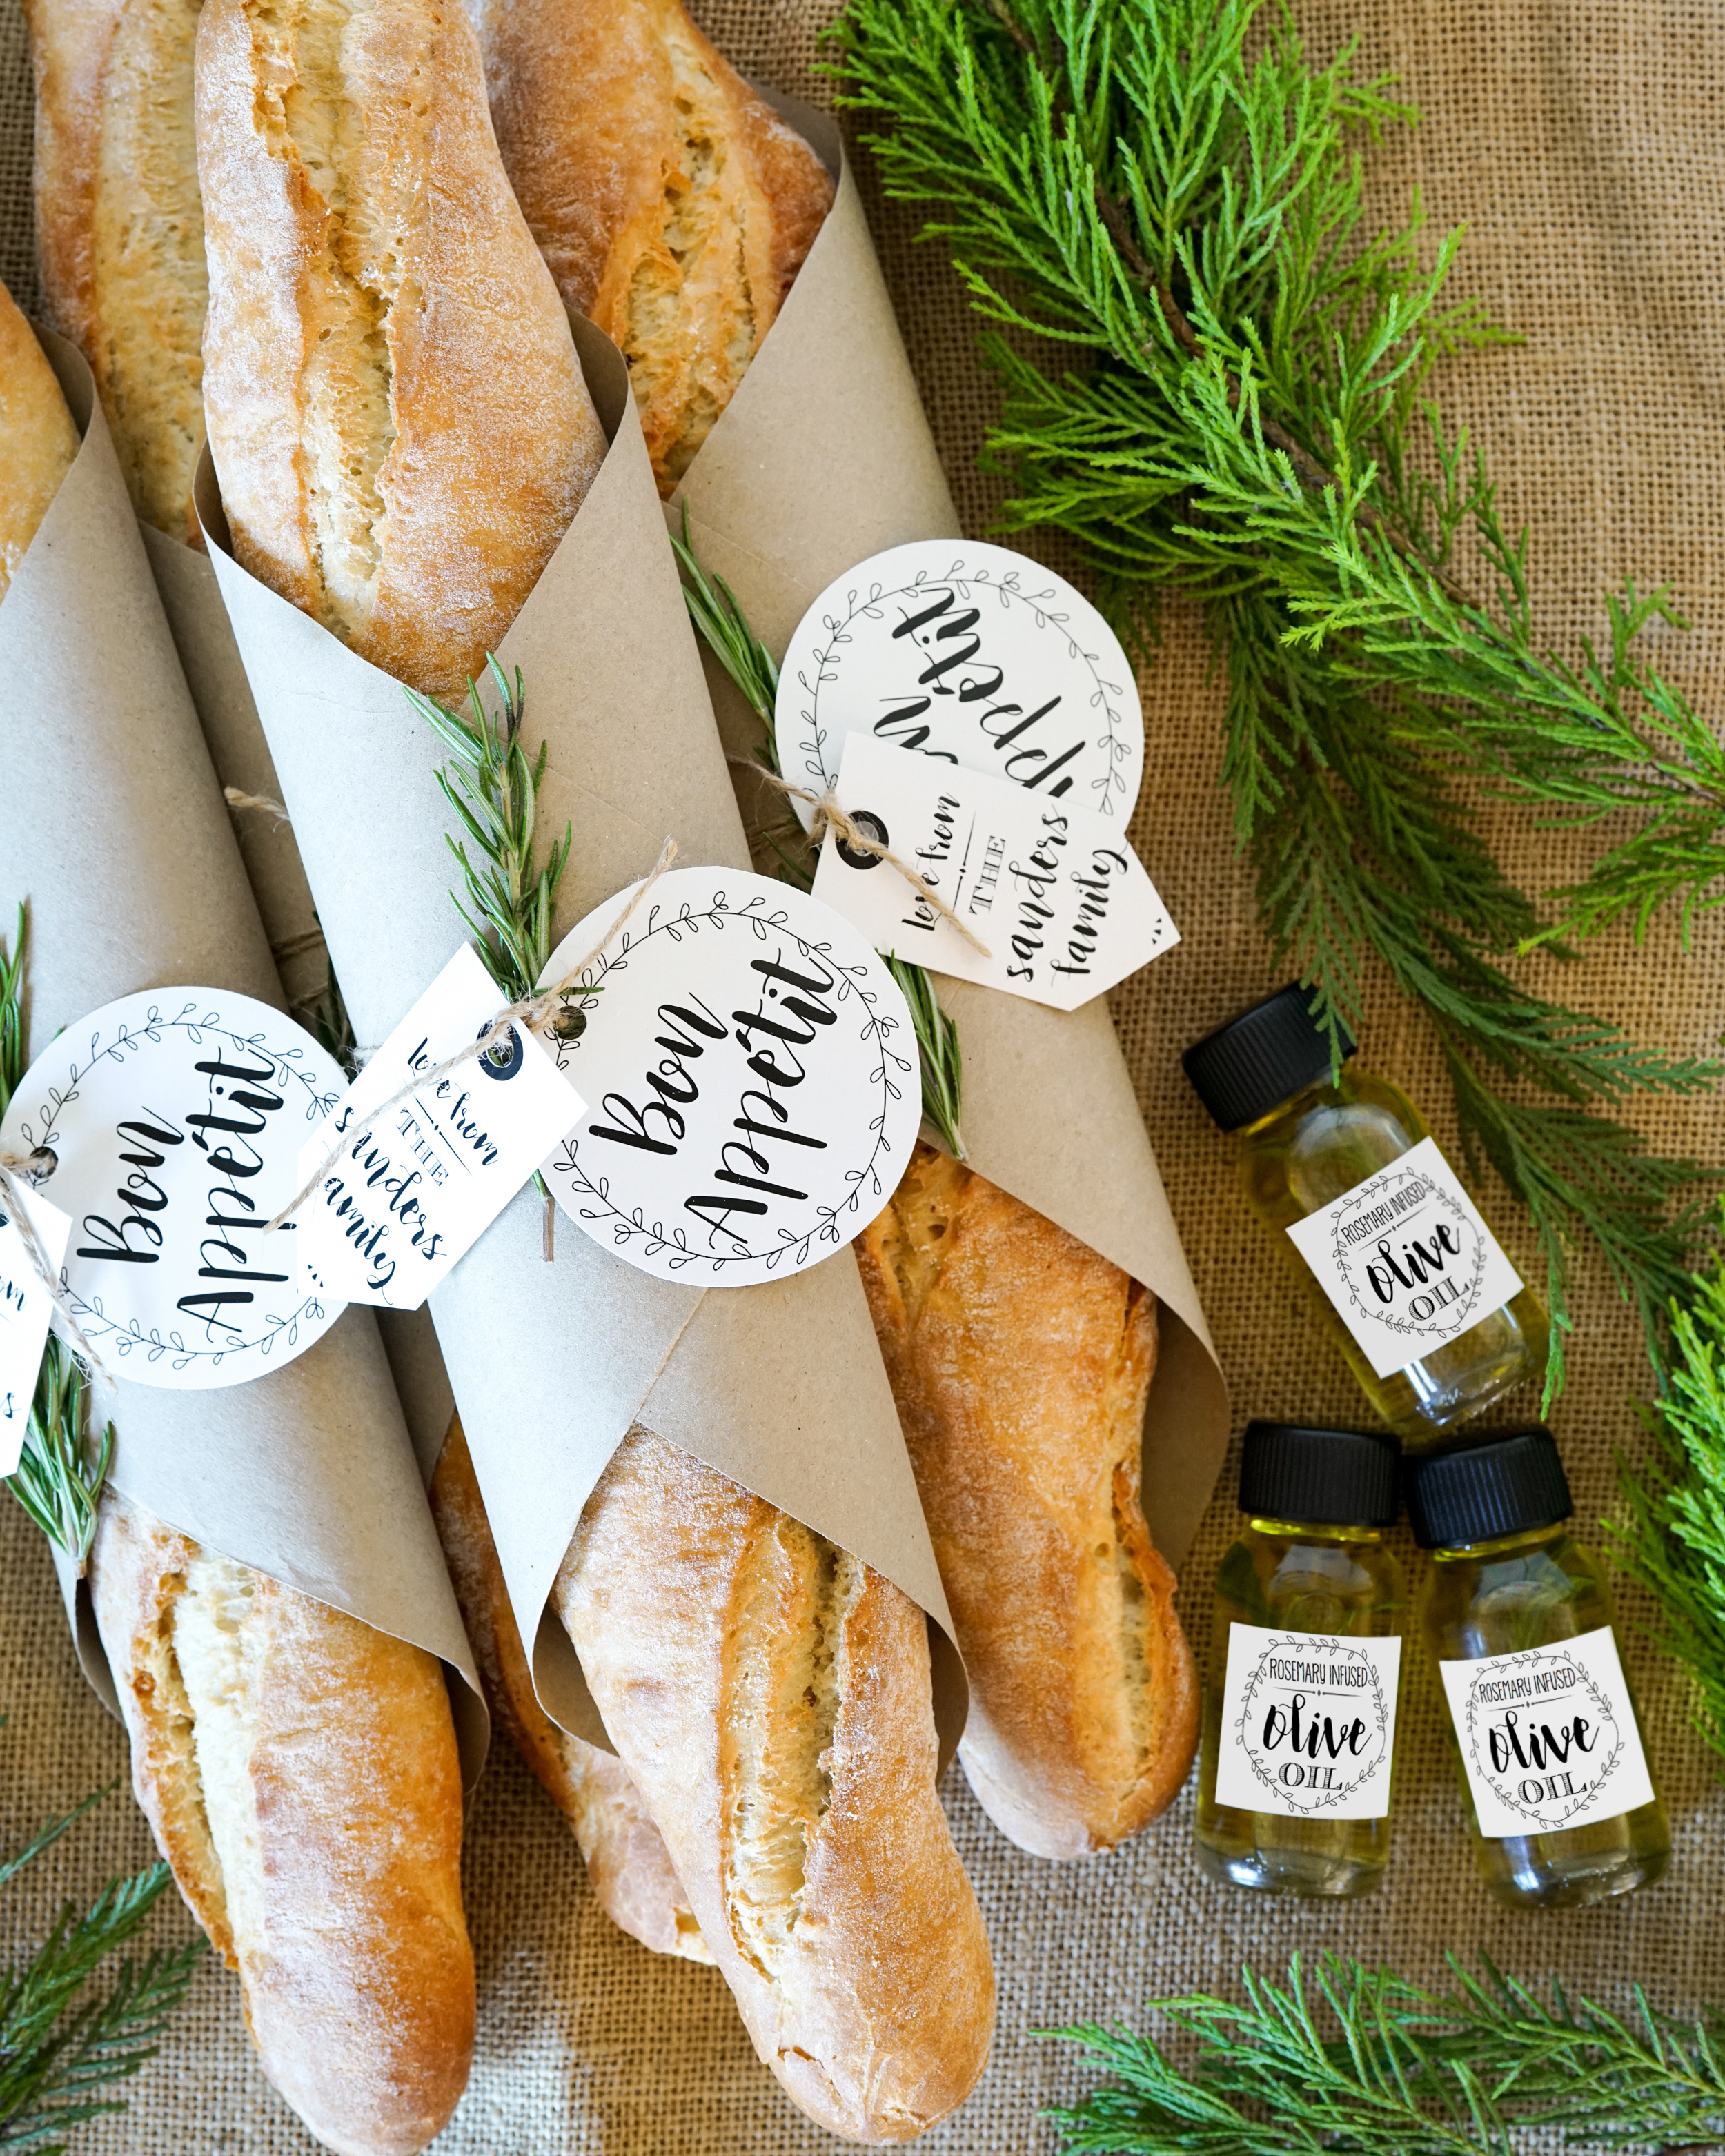 Free Bread and Rosemary Olive Oil label